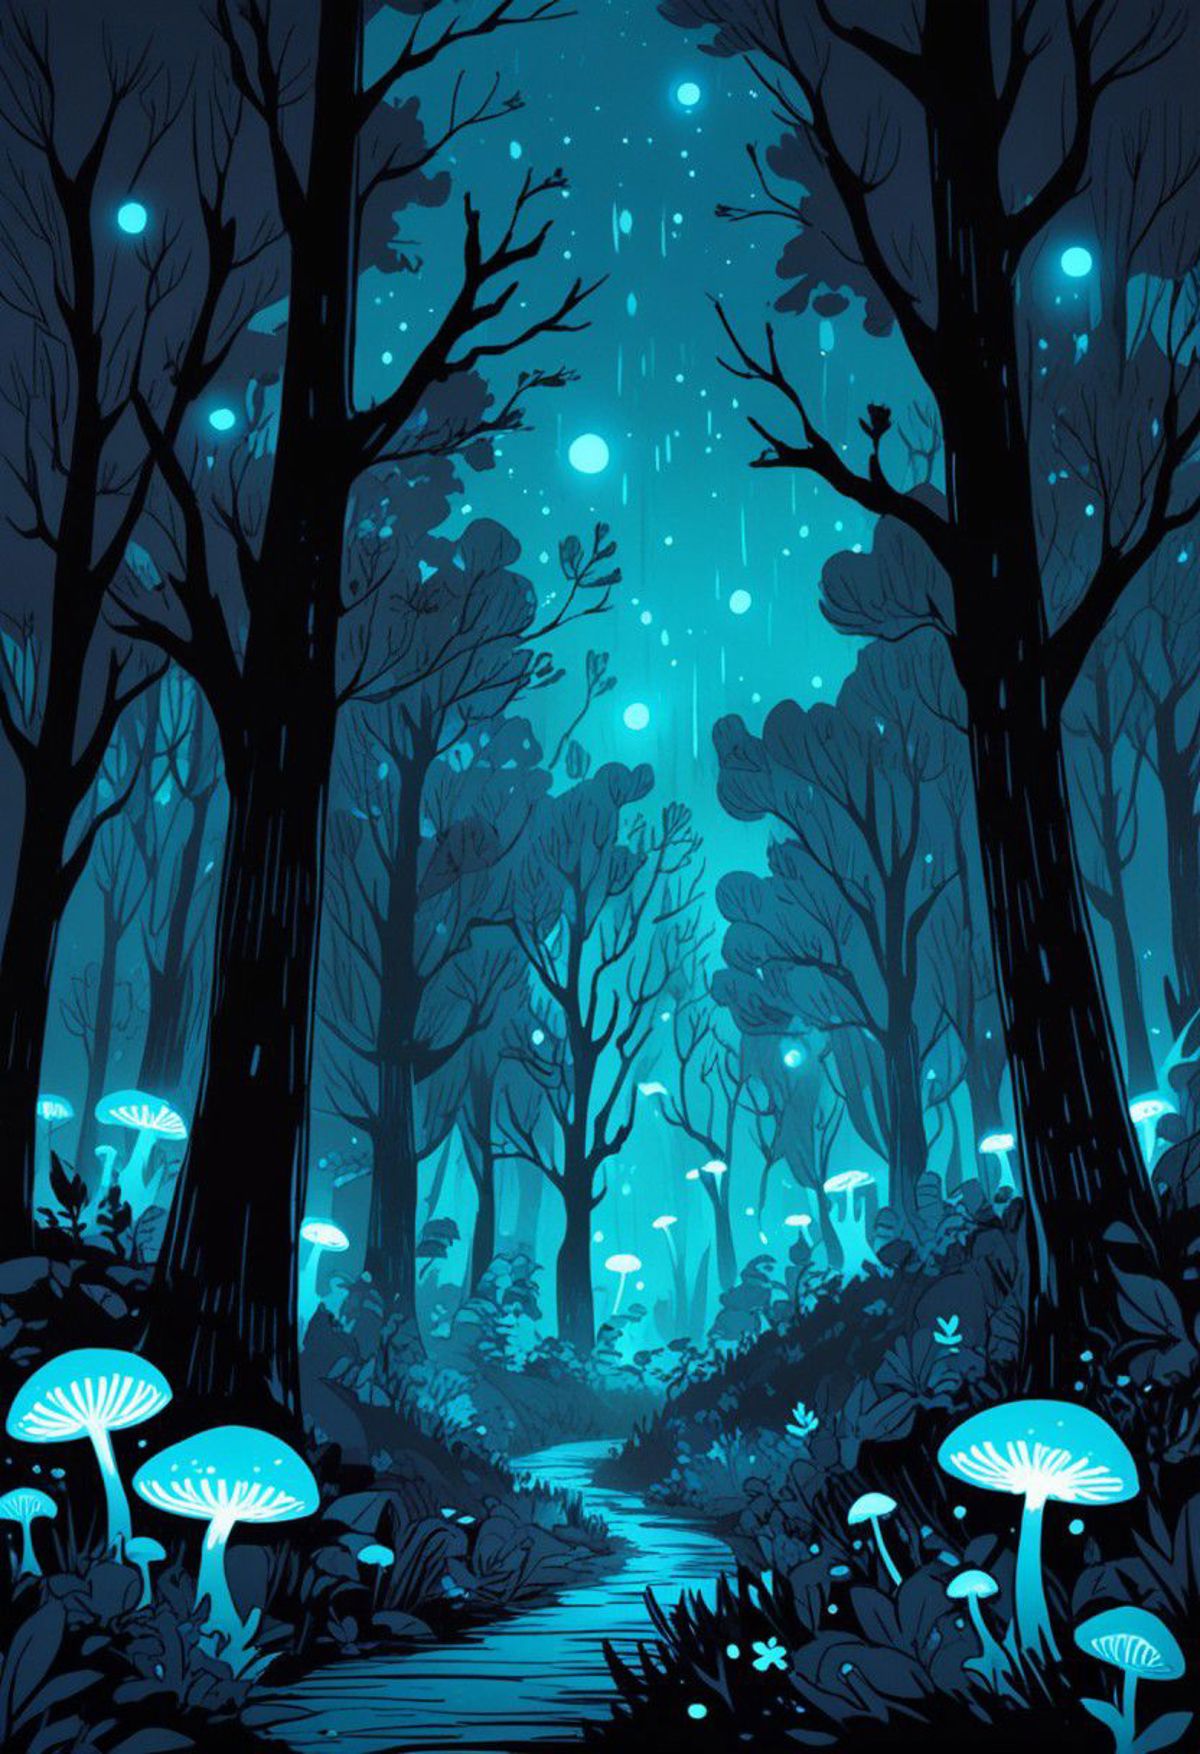 A Dark Forest at Night with Illuminated Mushrooms and Trees